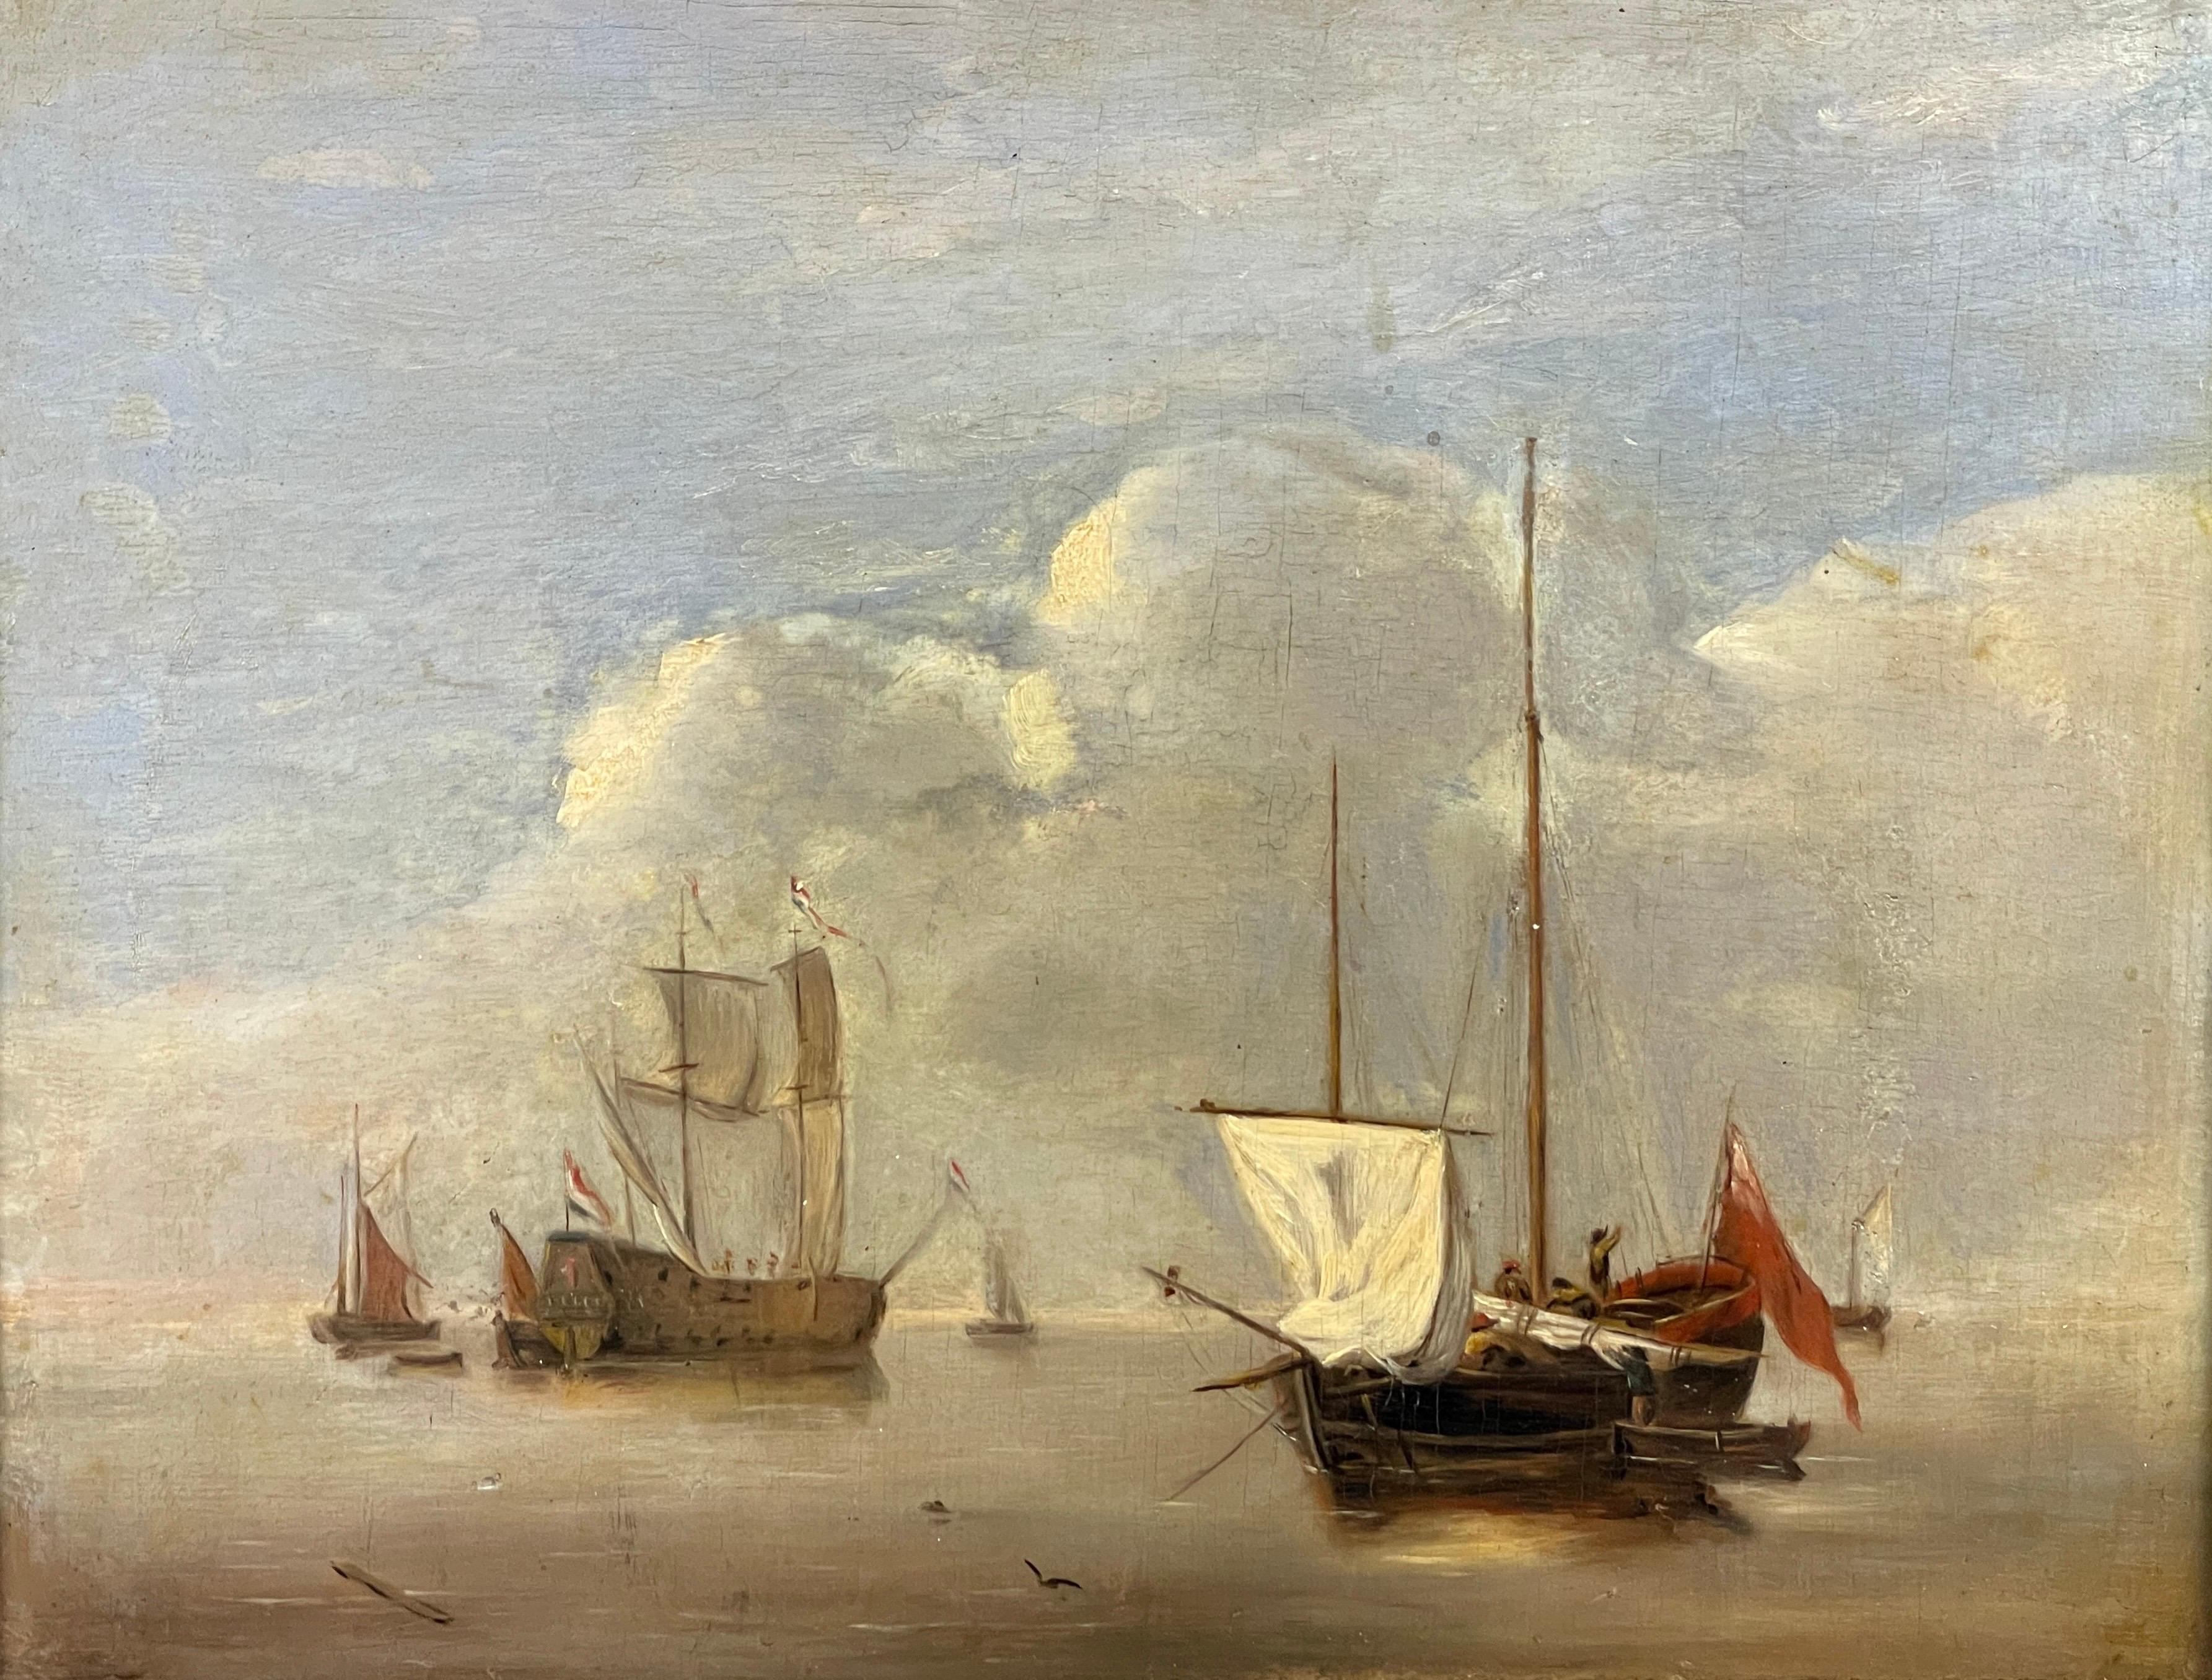 Shipping in Calm Waters, 18th Century Dutch Oil on Wood Panel, Man o War